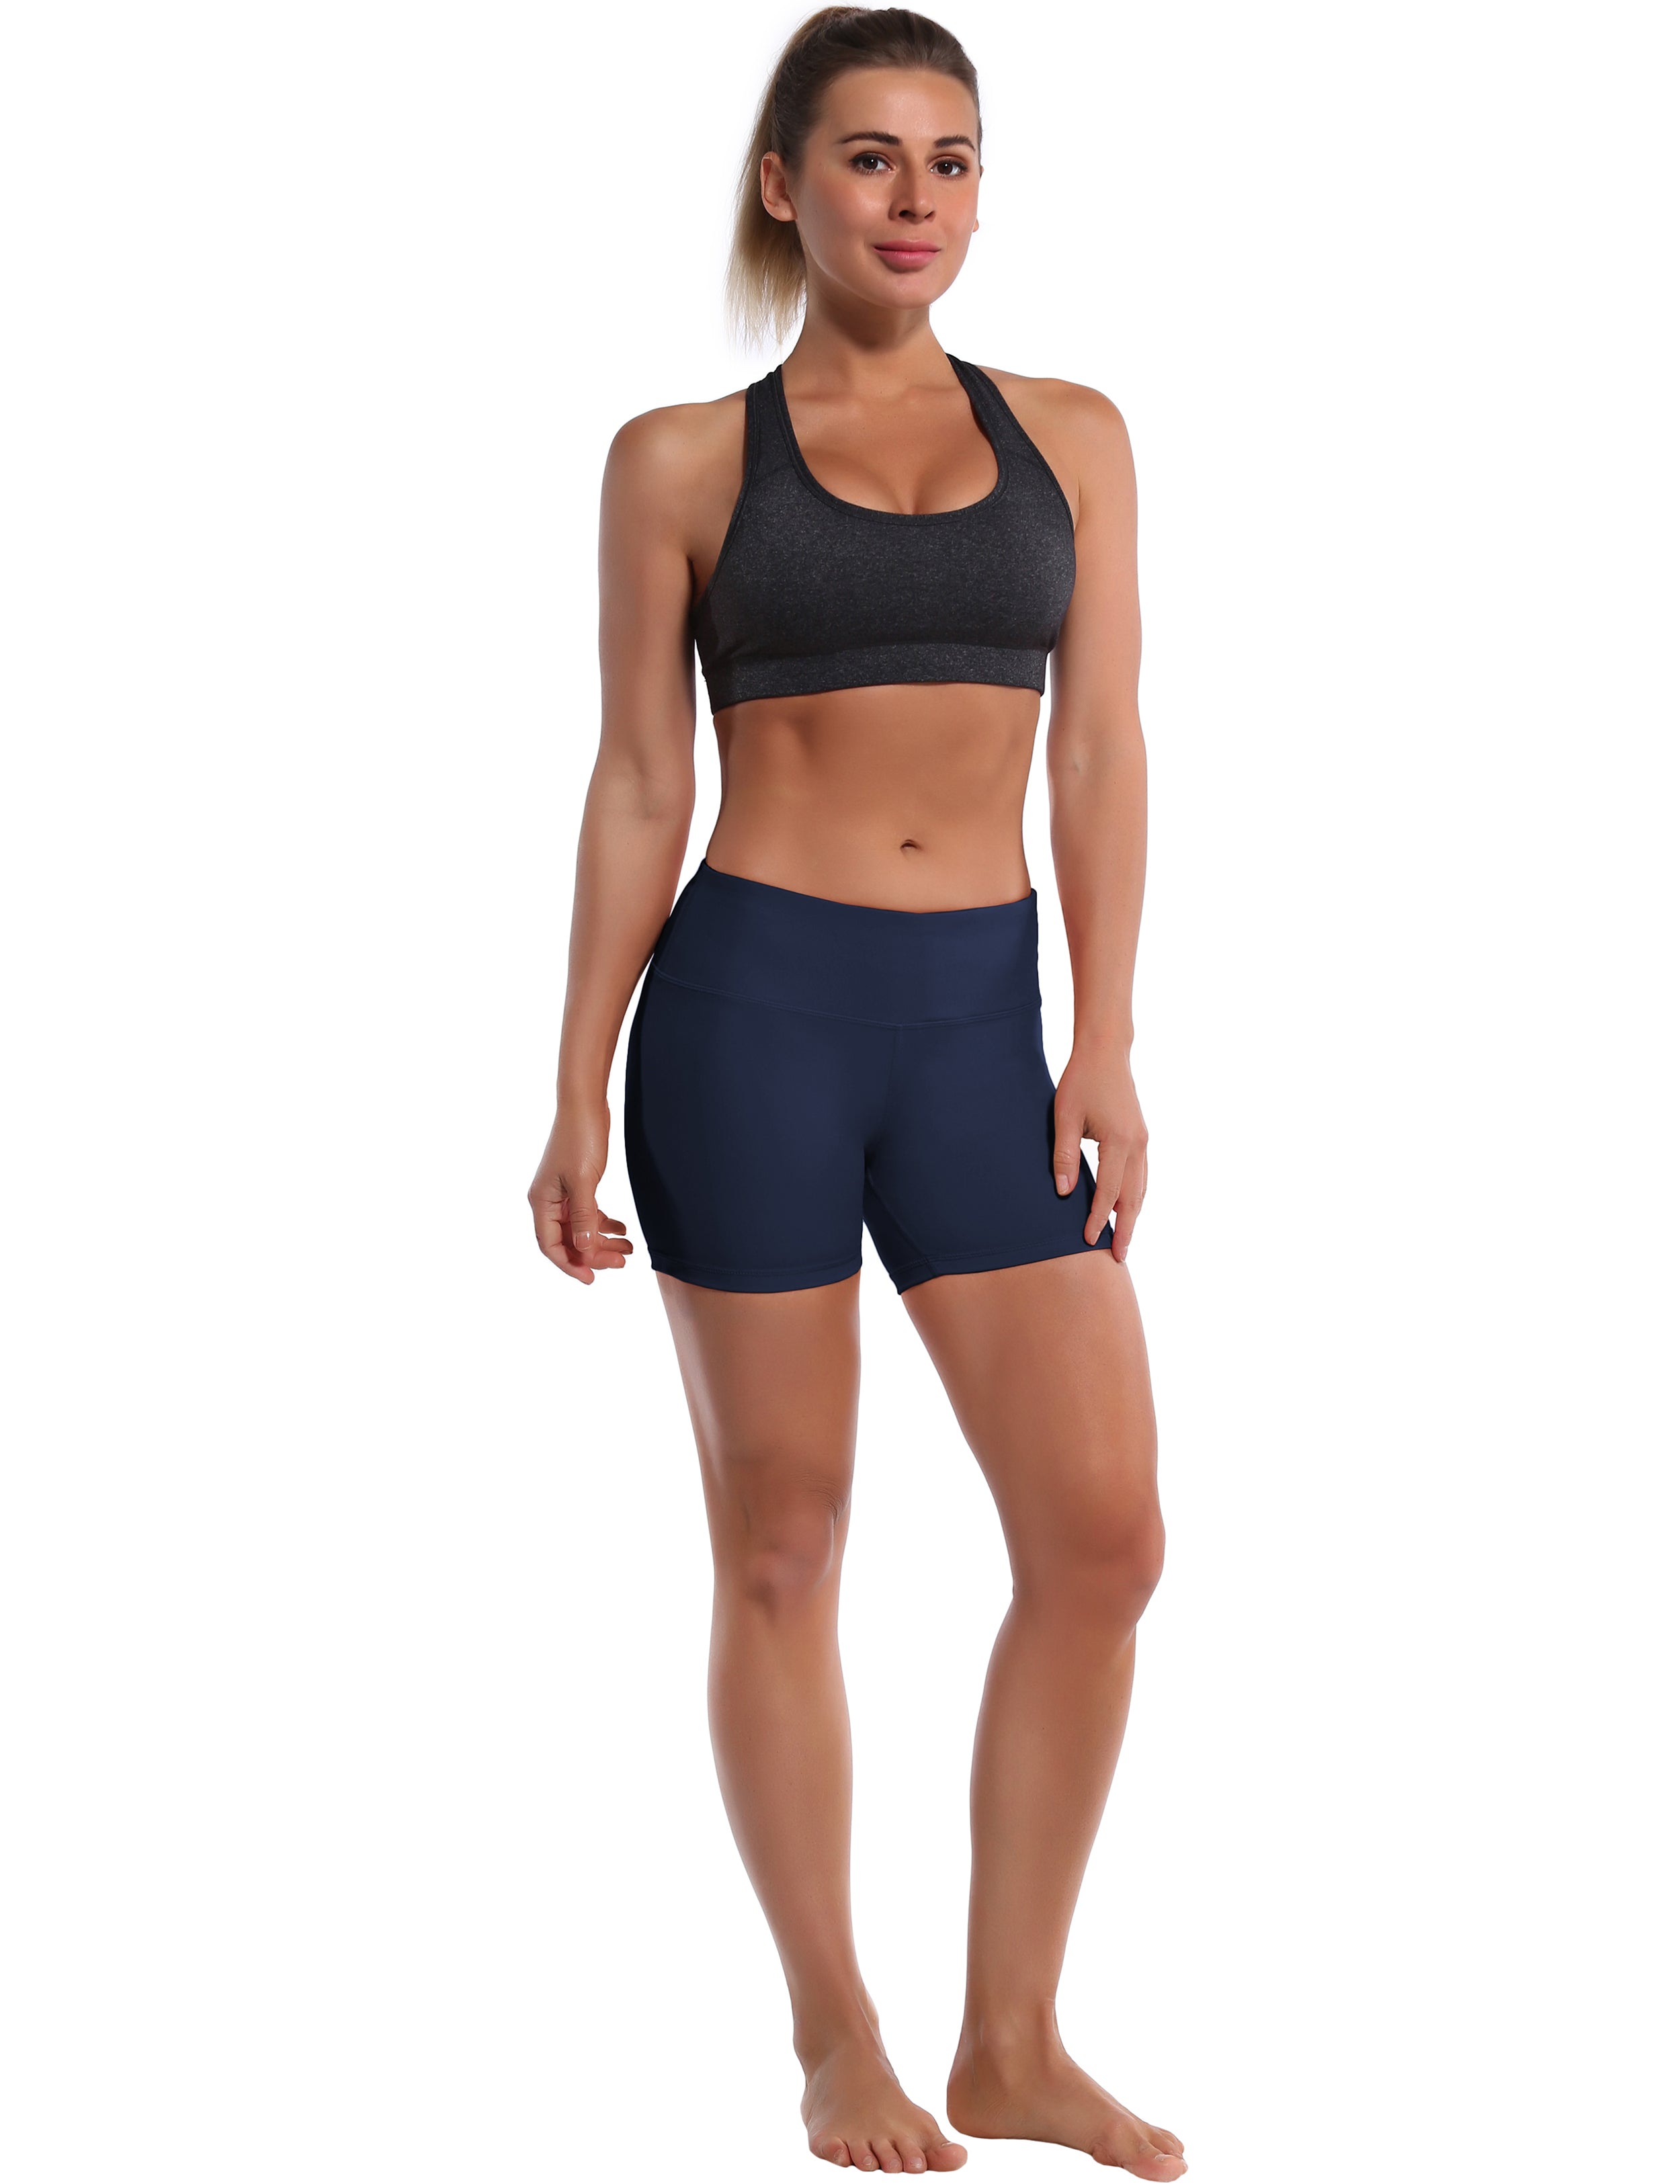 4" Yoga Shorts darknavy Sleek, soft, smooth and totally comfortable: our newest style is here. Softest-ever fabric High elasticity High density 4-way stretch Fabric doesn't attract lint easily No see-through Moisture-wicking Machine wash 75% Nylon, 25% Spandex